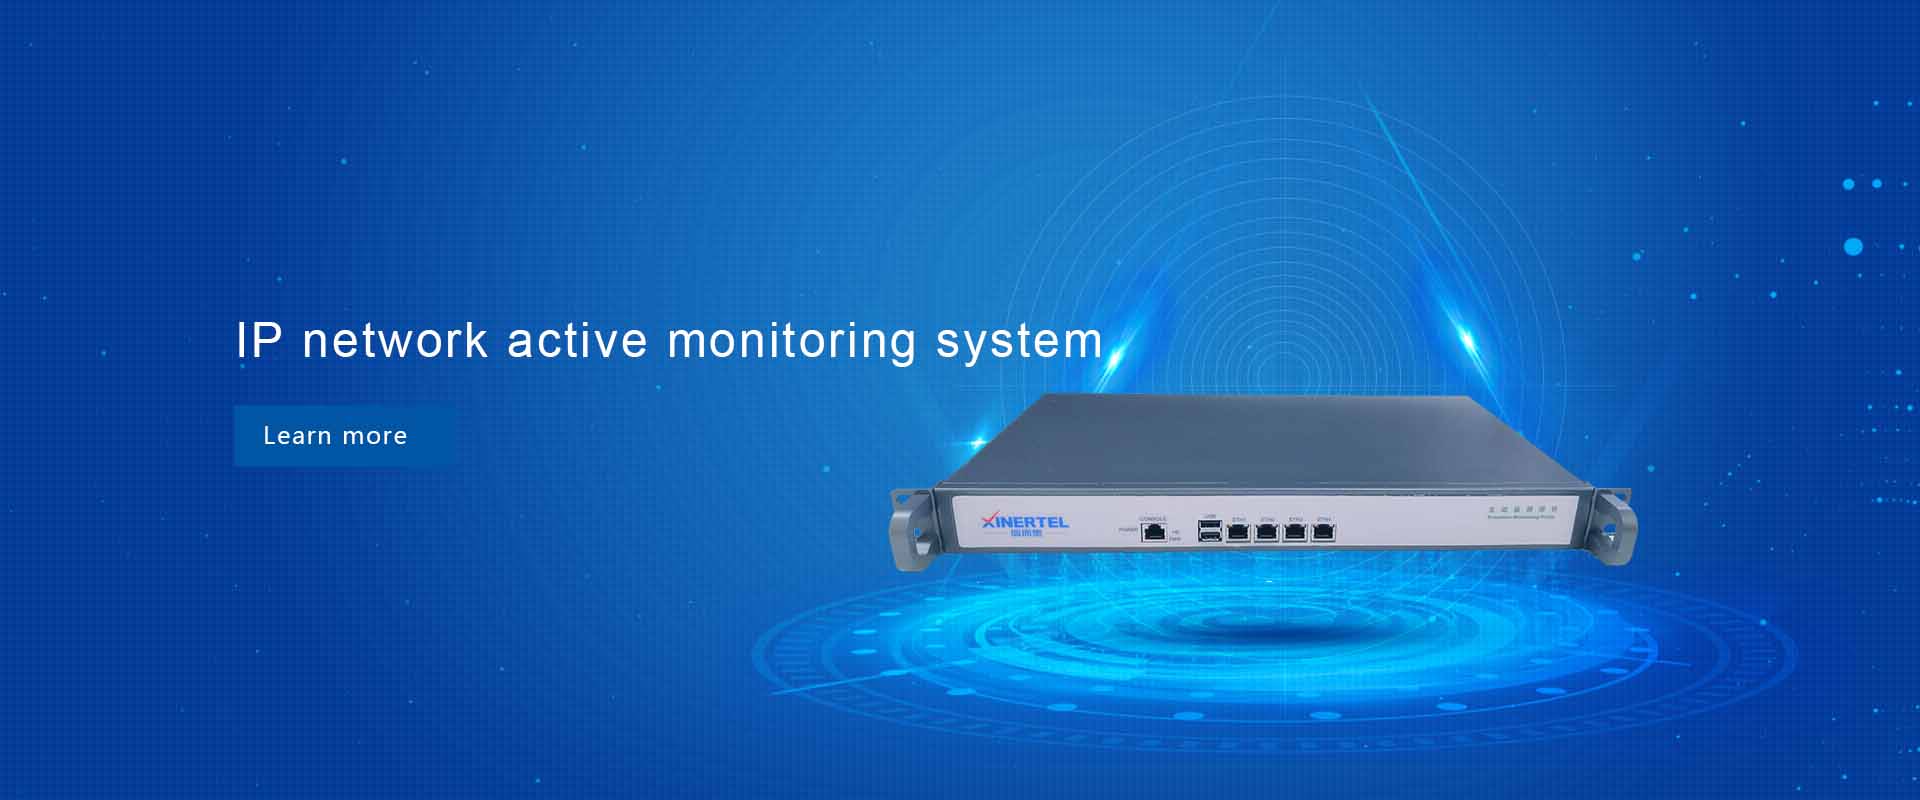 IP network active monitoring system